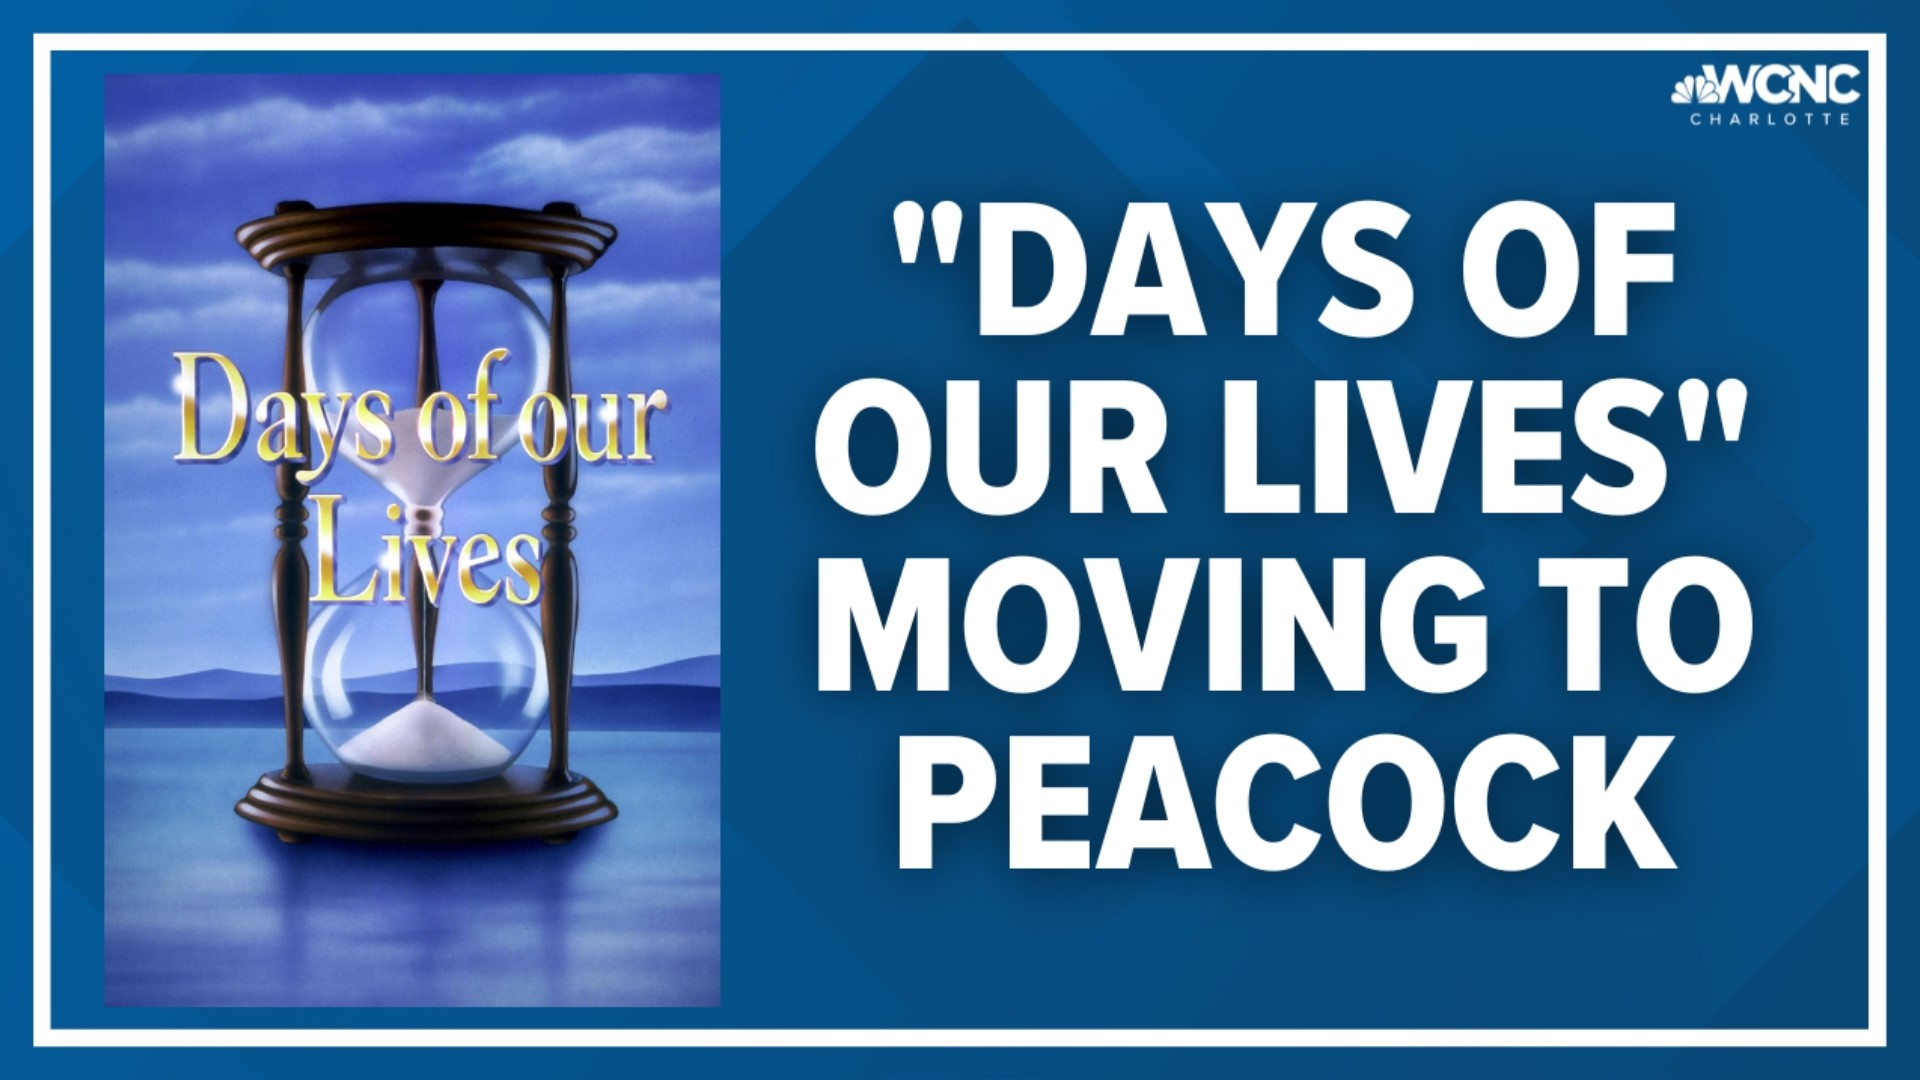 On Sept. 12, Days of our Lives will be streaming exclusively on Peacock, including new and past episodes.